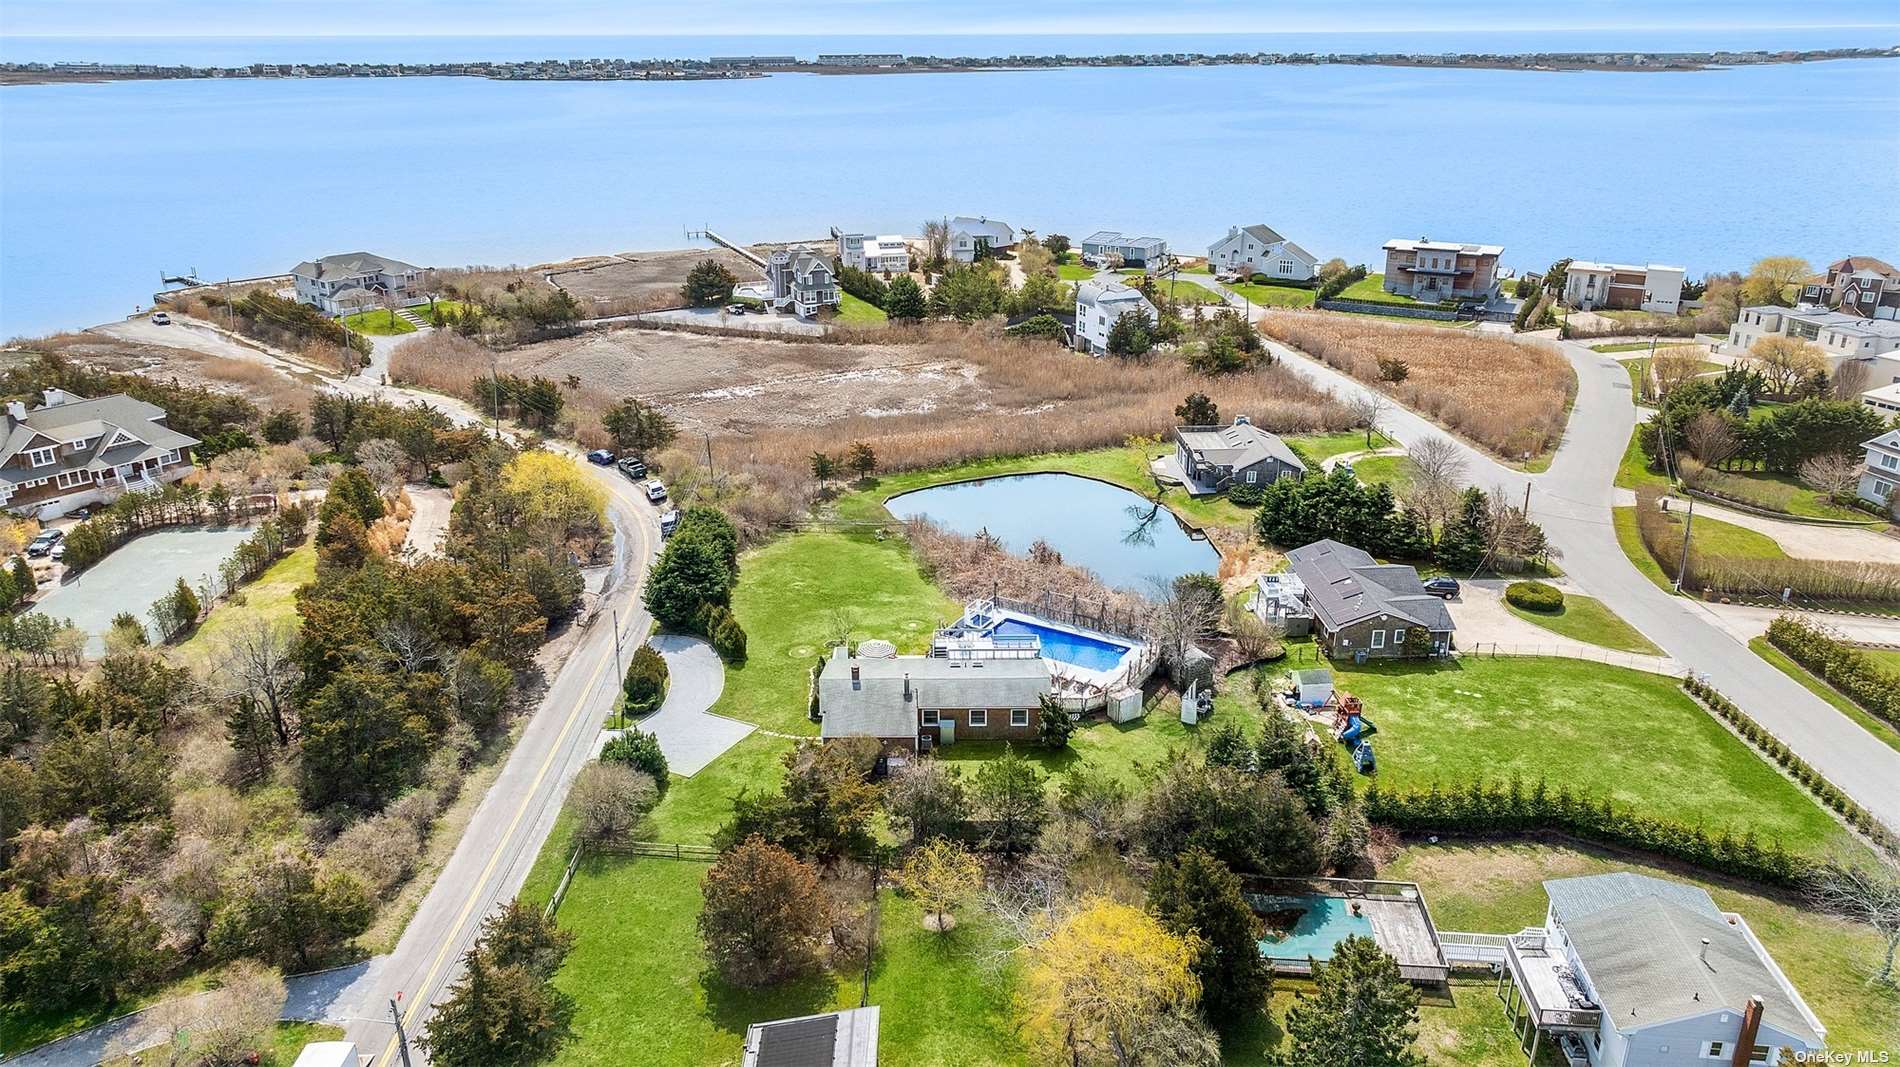 Property for Sale at 9 Tanners Lane, Westhampton, Hamptons, NY - Bedrooms: 4 
Bathrooms: 2  - $1,199,000